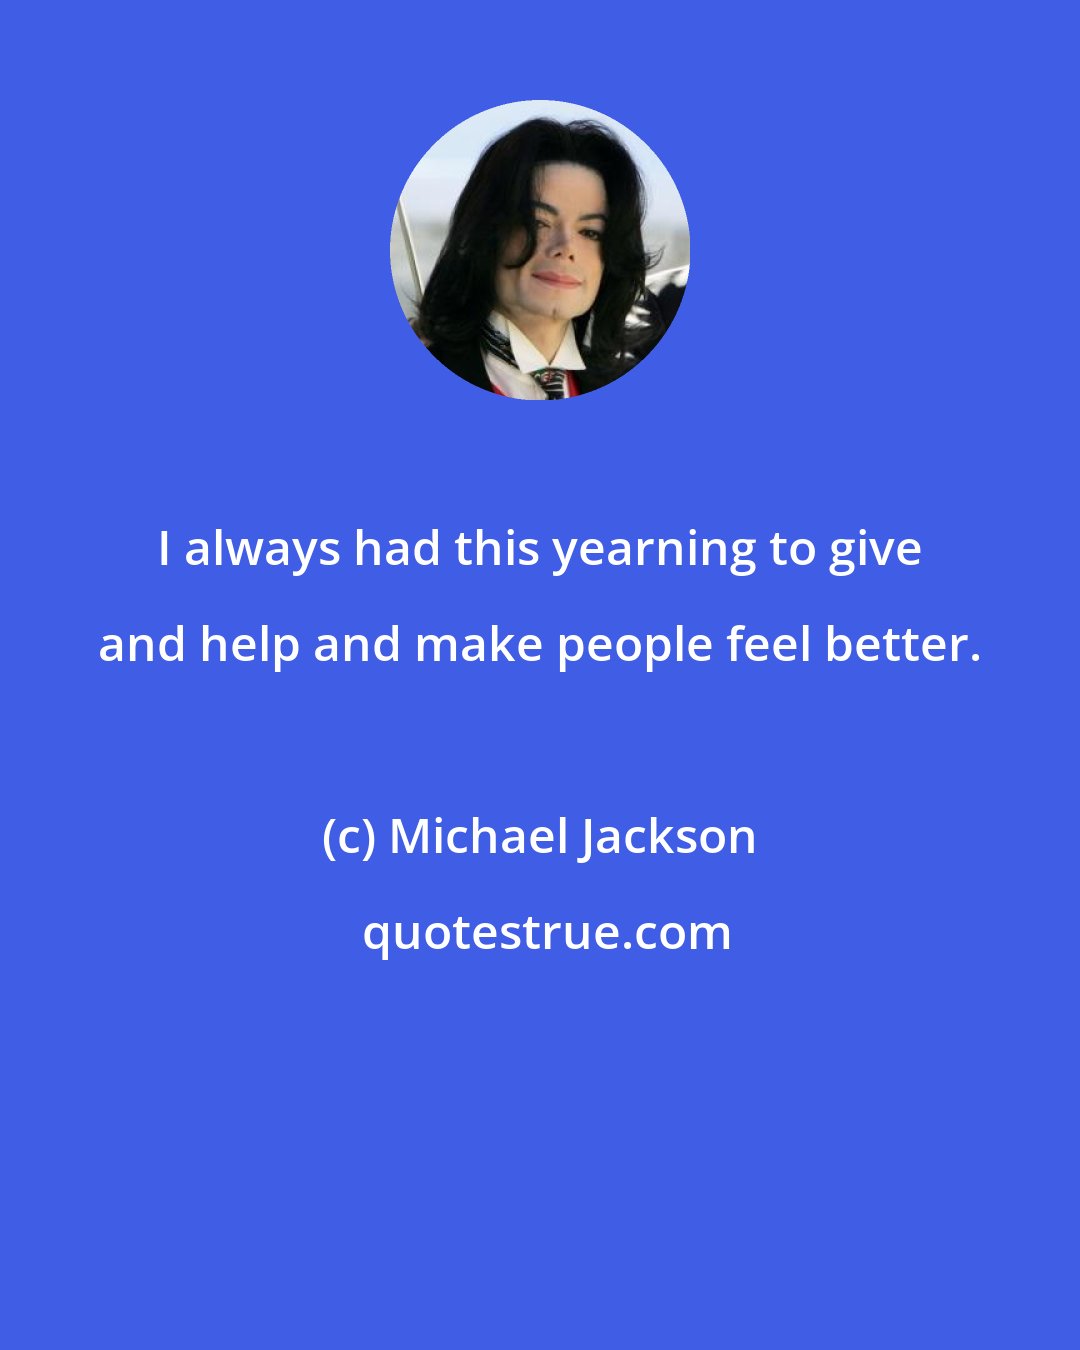 Michael Jackson: I always had this yearning to give and help and make people feel better.